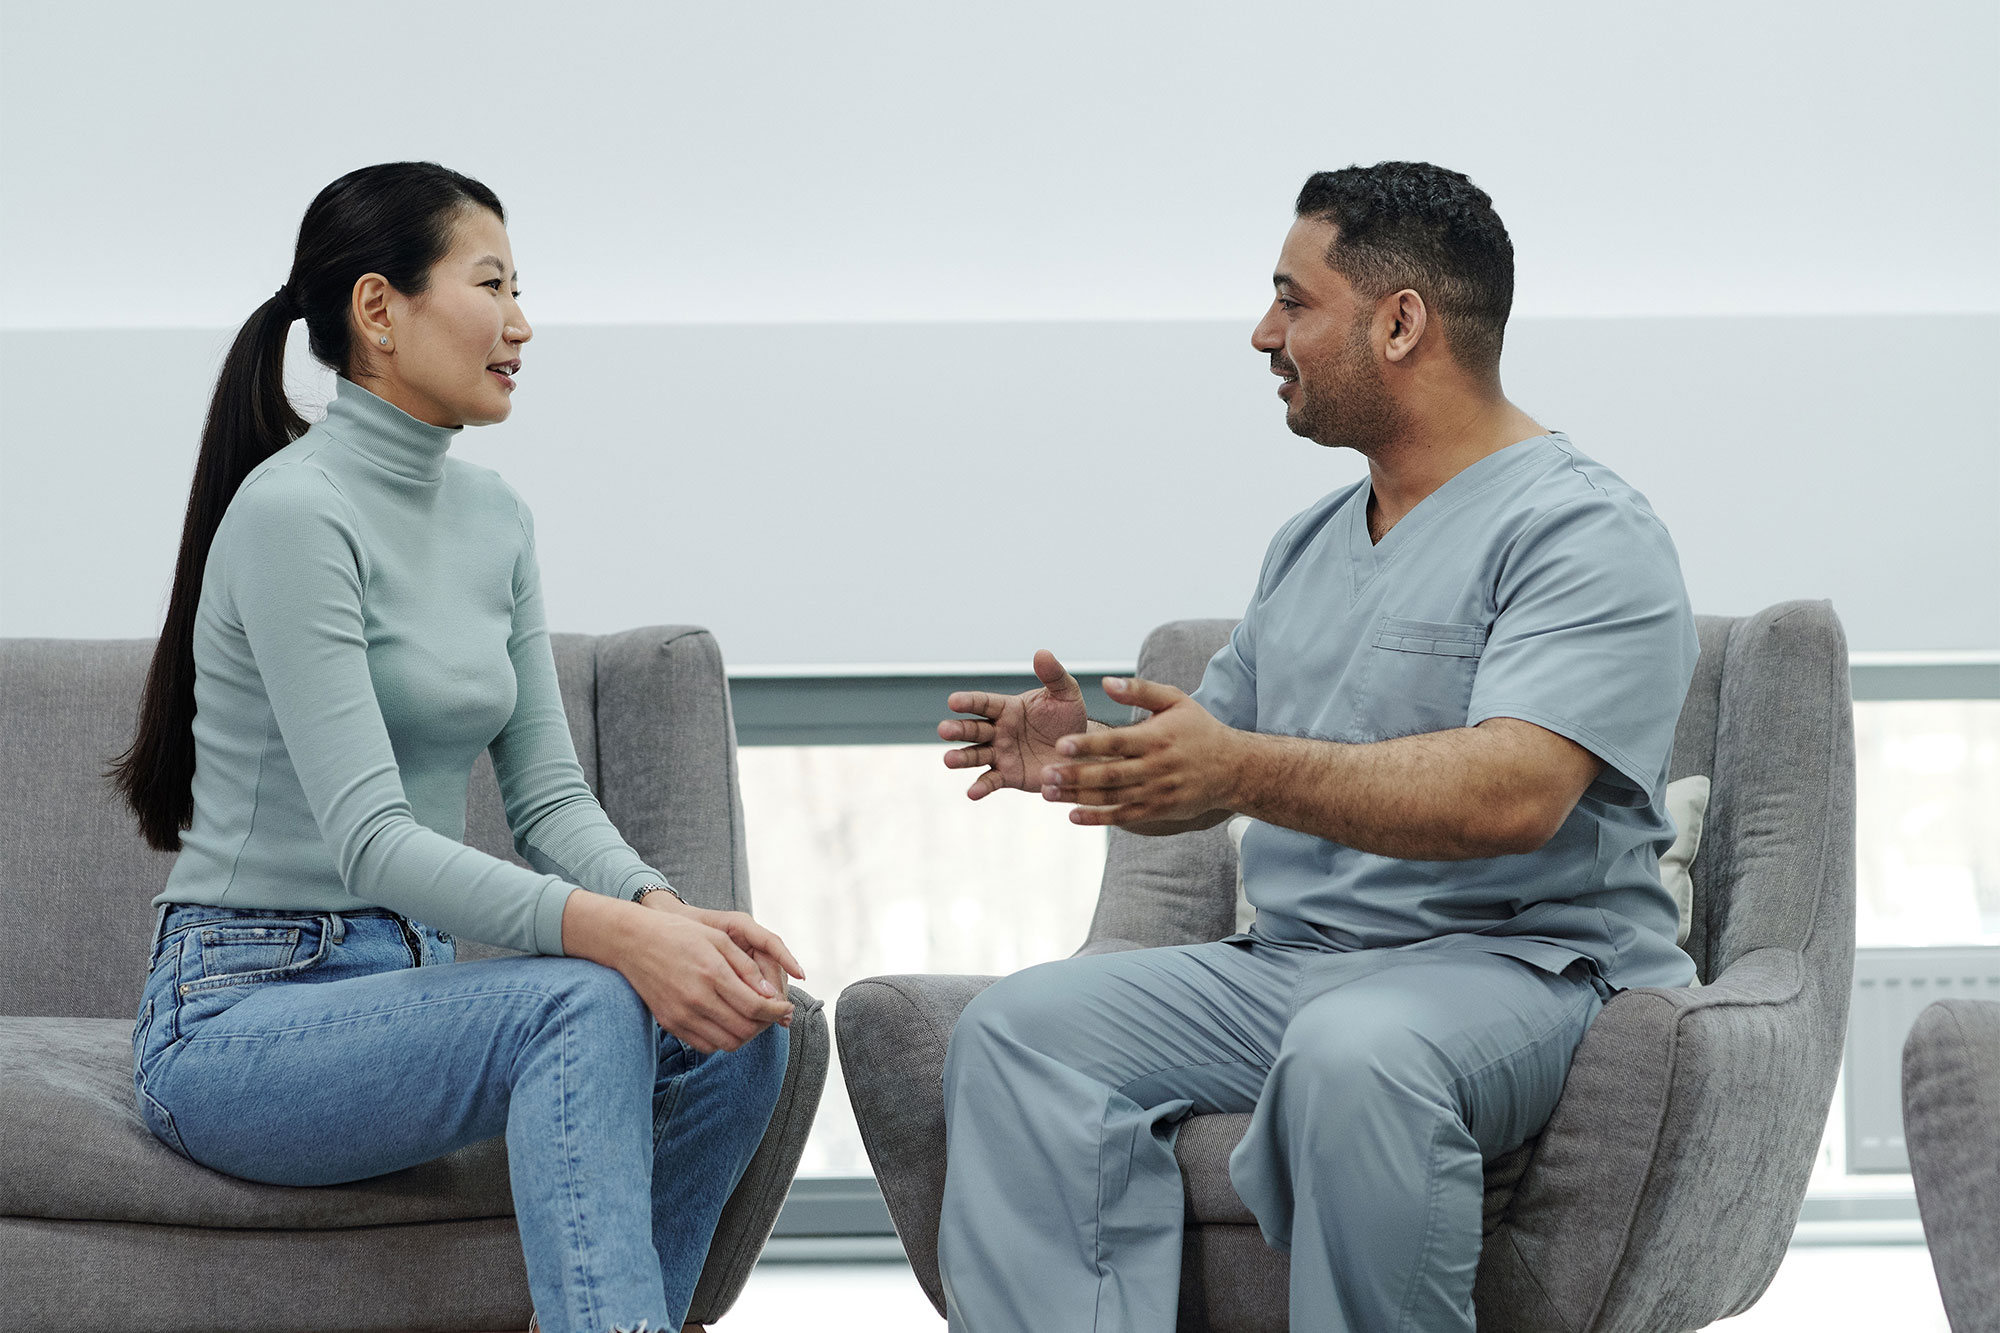 Doctor speaking to a patient